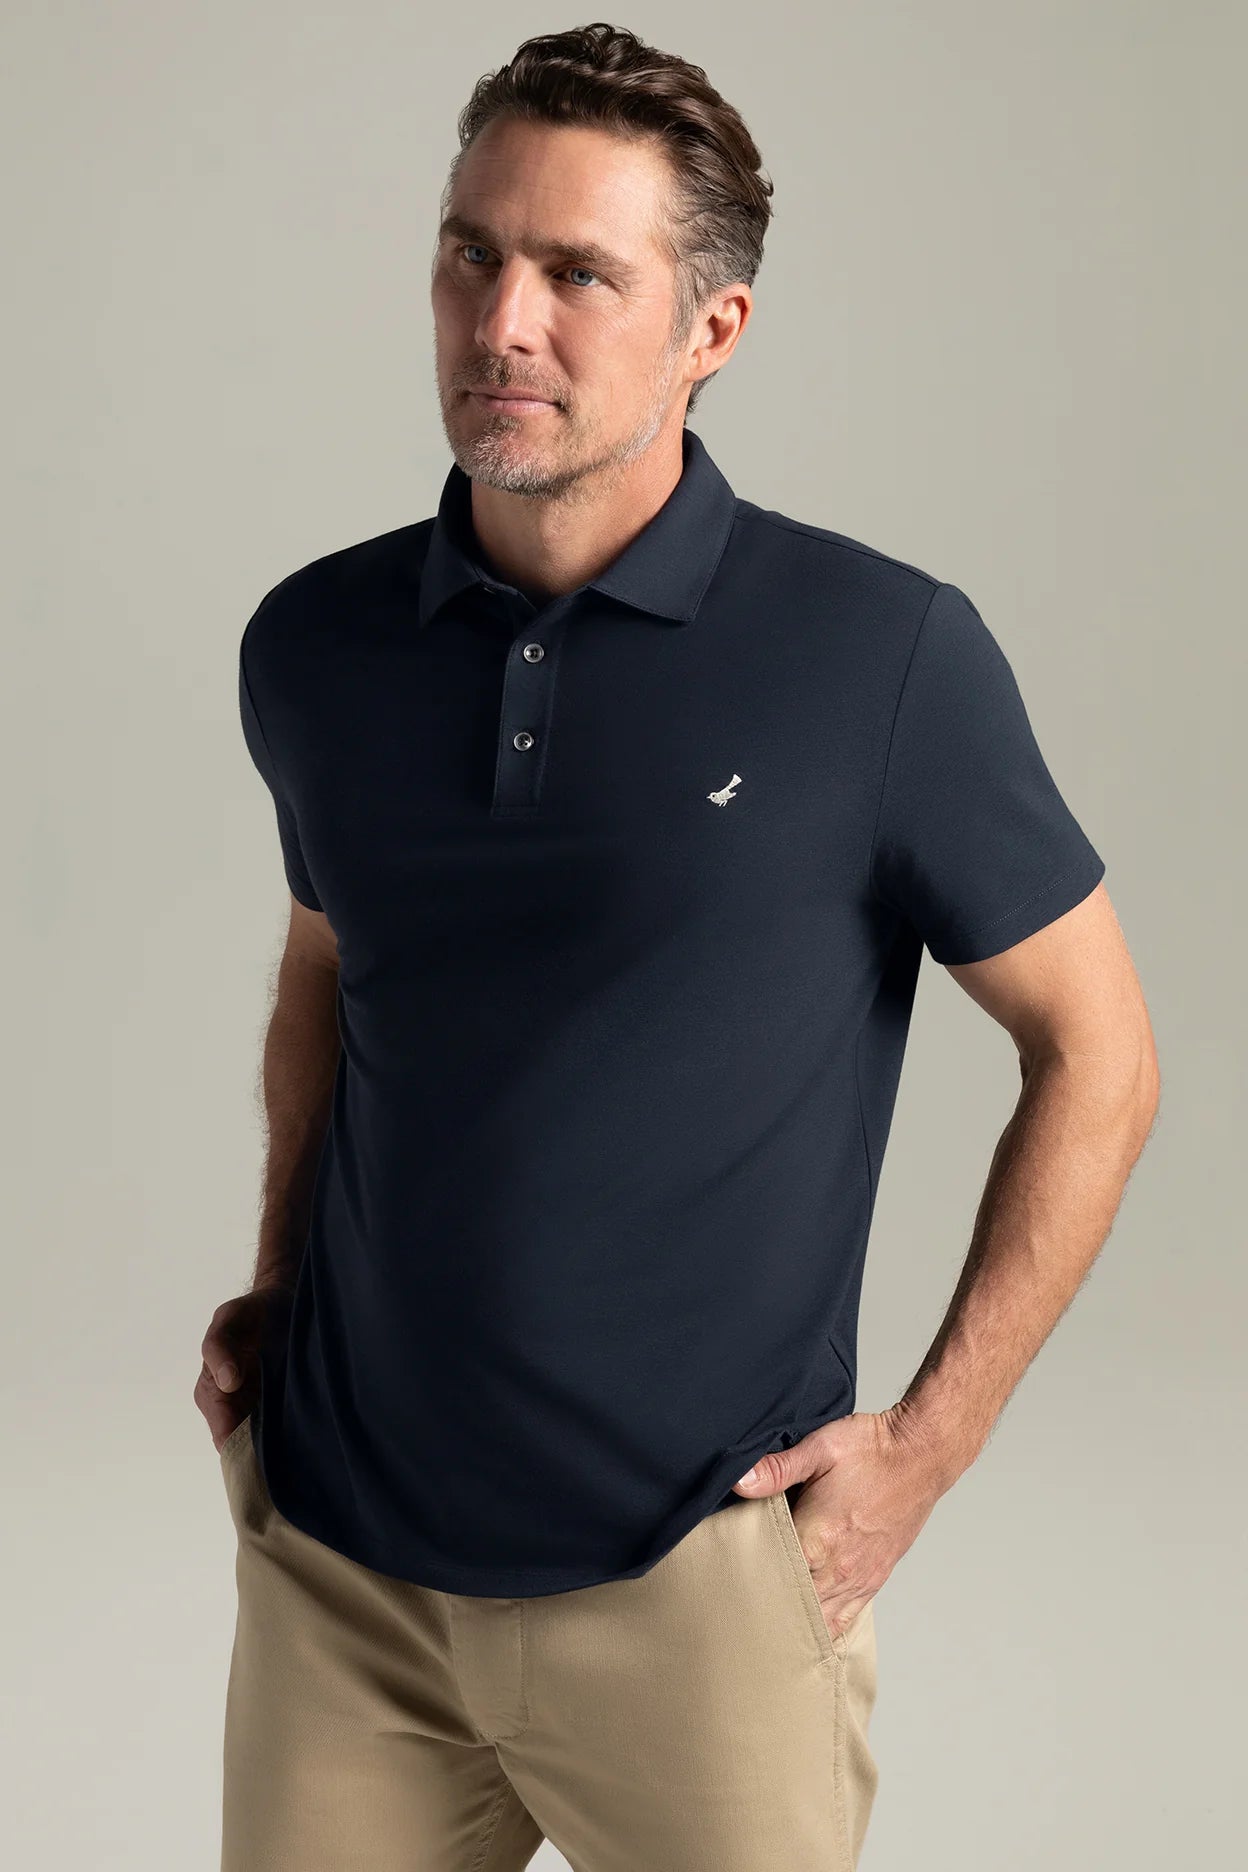 Mojave Classic Fit Featherweight Jersey Polo with Hyper-Cool Jade